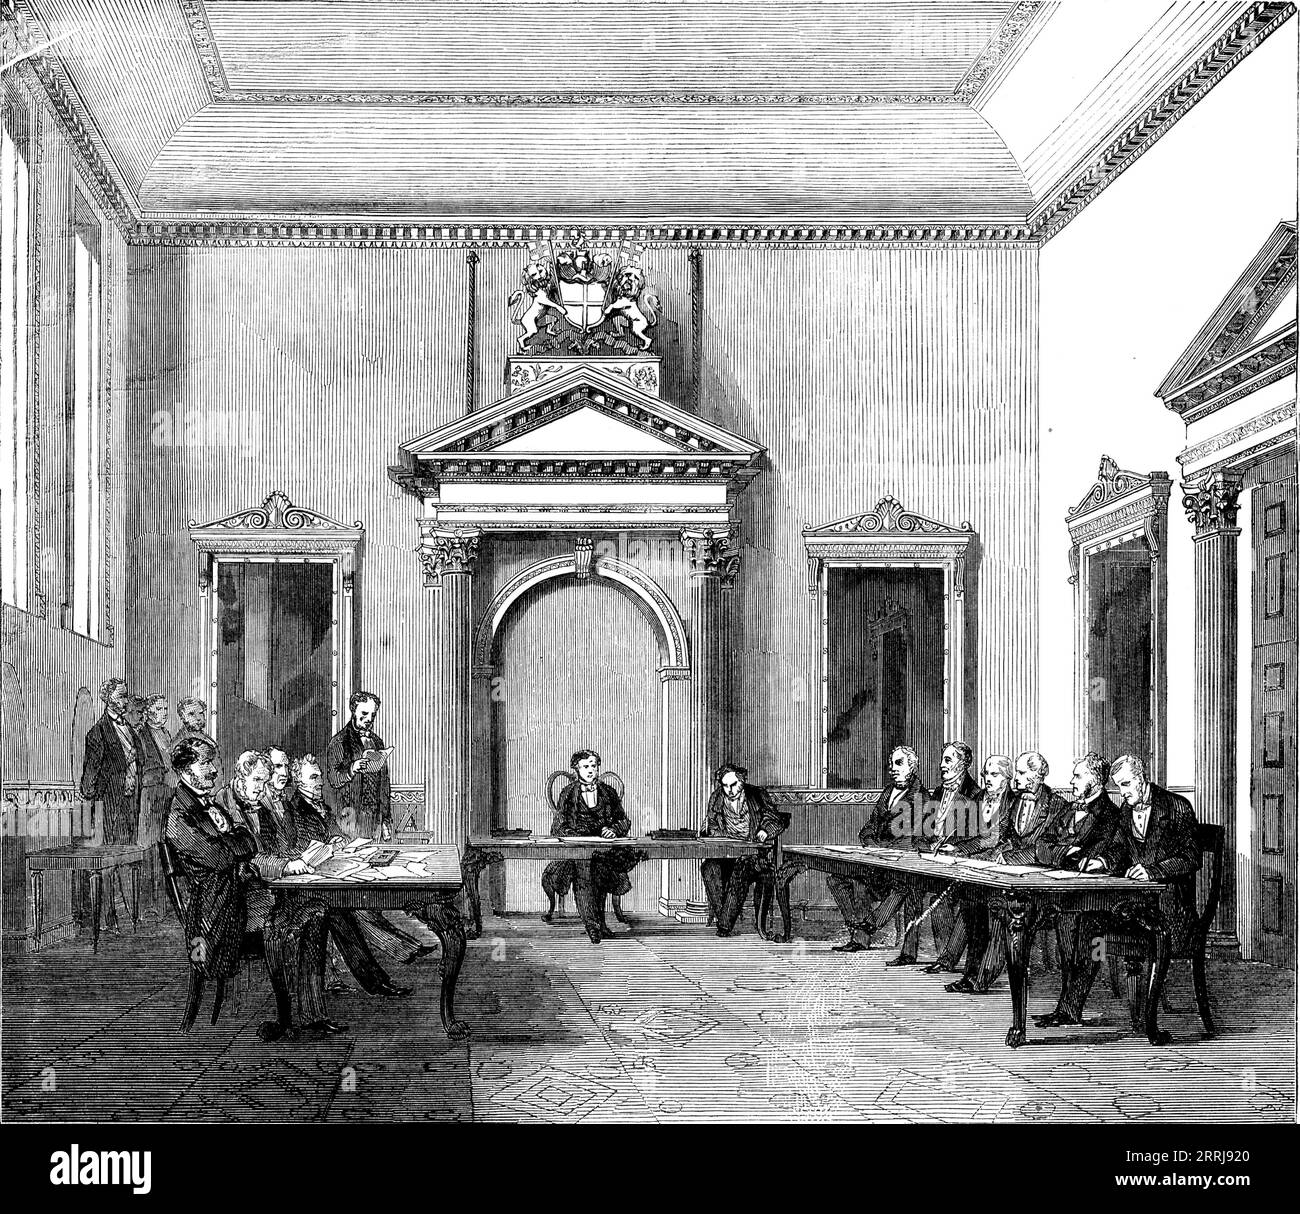 The New Indian Council Chamber, 1858. Meeting room in India House, London. View of '...the chamber in which the new Council of India now holds its deliberations. On entering this apartment...there is some little evidence of the wealth and splendour of the great association of merchant princes. It is situated on the western side of the main entrance to the building in Leadenhall-street, and is a remarkably handsome and commodious room. It is spacious and lofty, and is lighted by three windows. It is said to form an exact cube of thirty feet. It is splendidly ornamented by gilding and large look Stock Photo